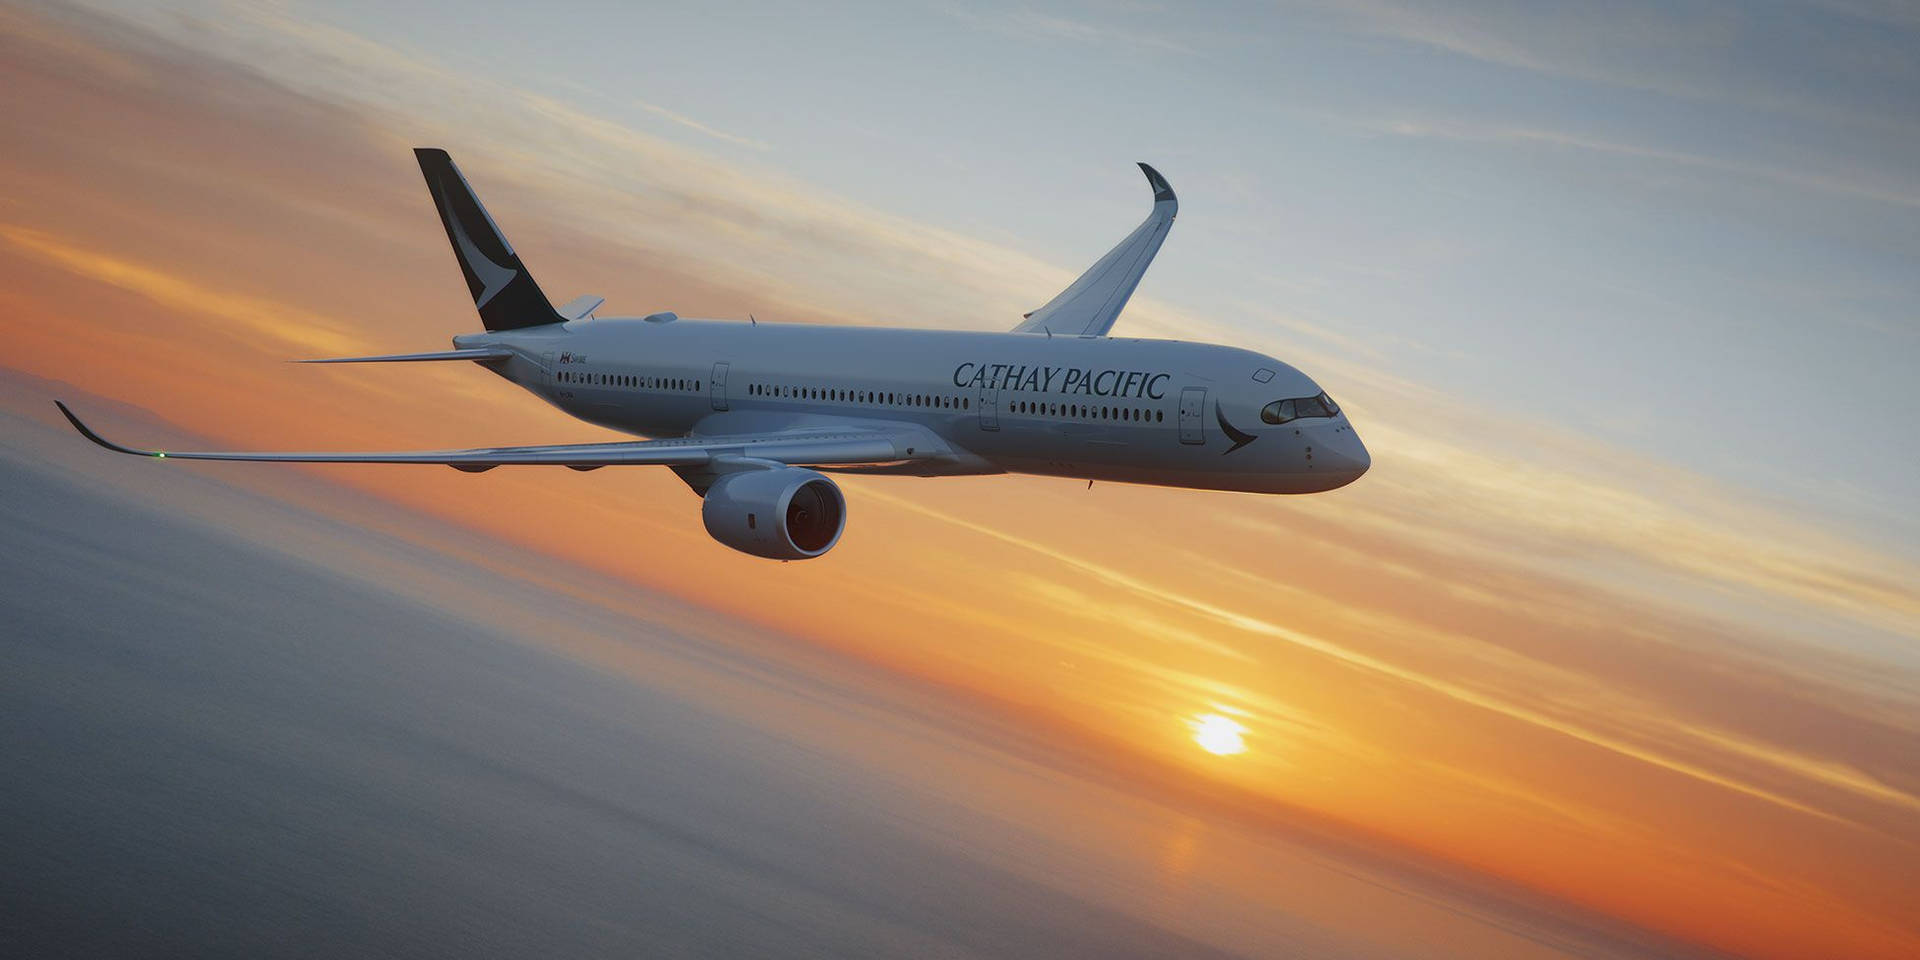 Cathay Pacific og solnedgang. Wallpaper